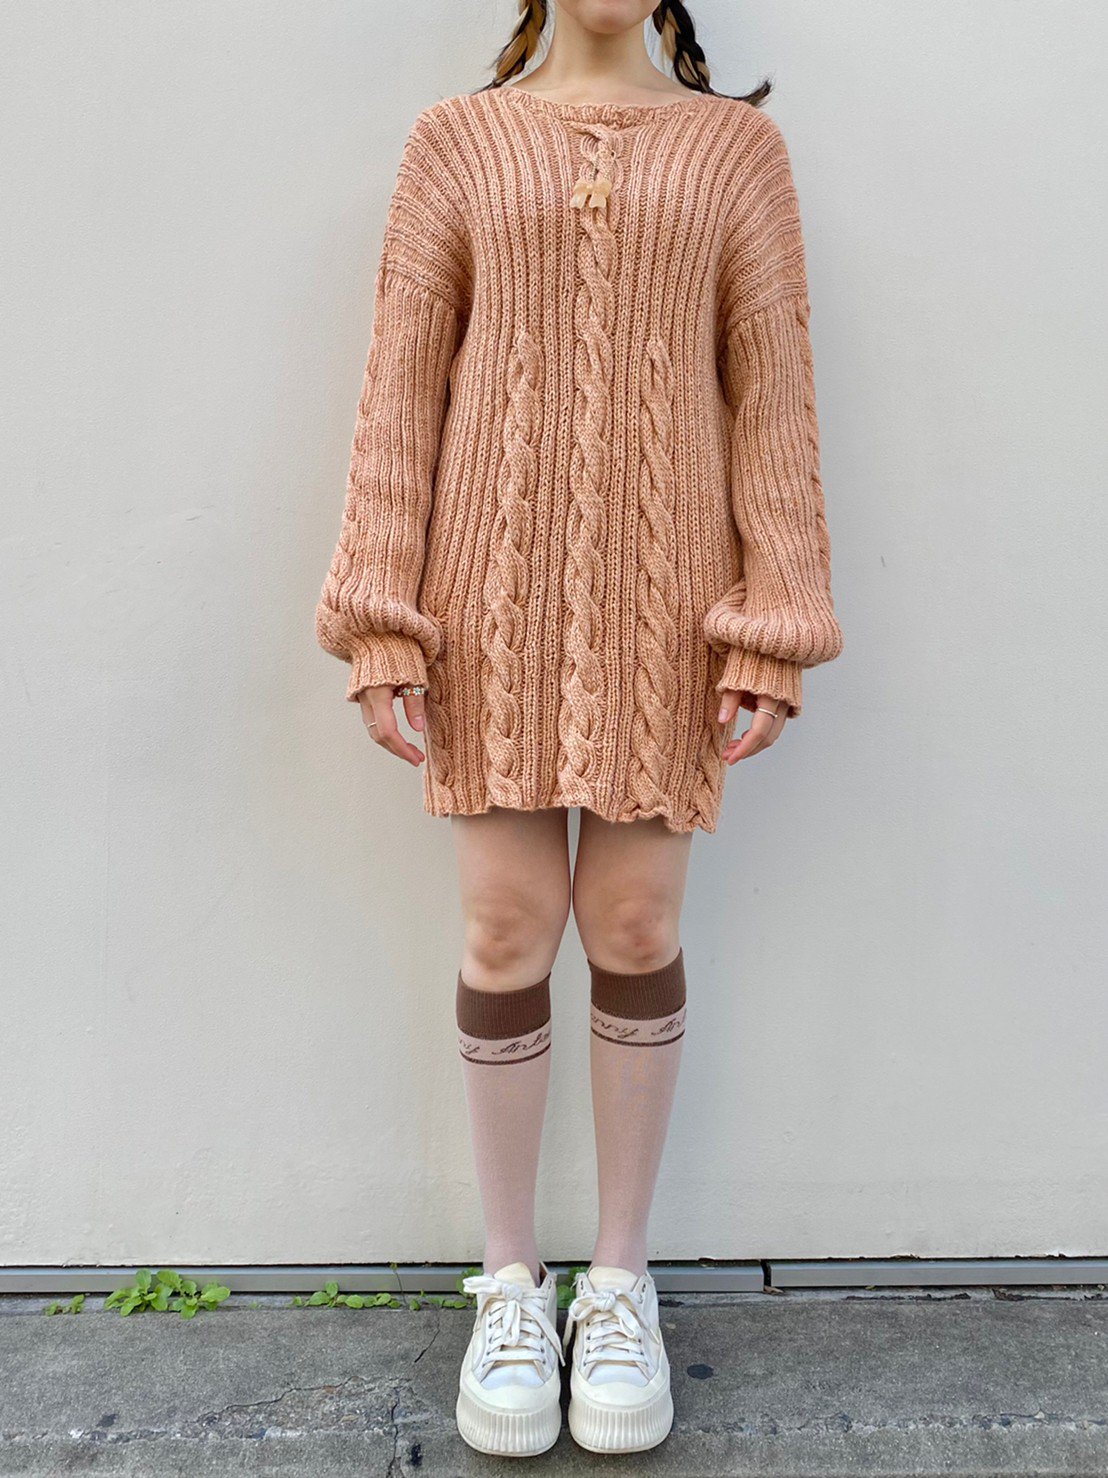 <img class='new_mark_img1' src='https://img.shop-pro.jp/img/new/icons20.gif' style='border:none;display:inline;margin:0px;padding:0px;width:auto;' />《SALE》caramel brown knit one-piece